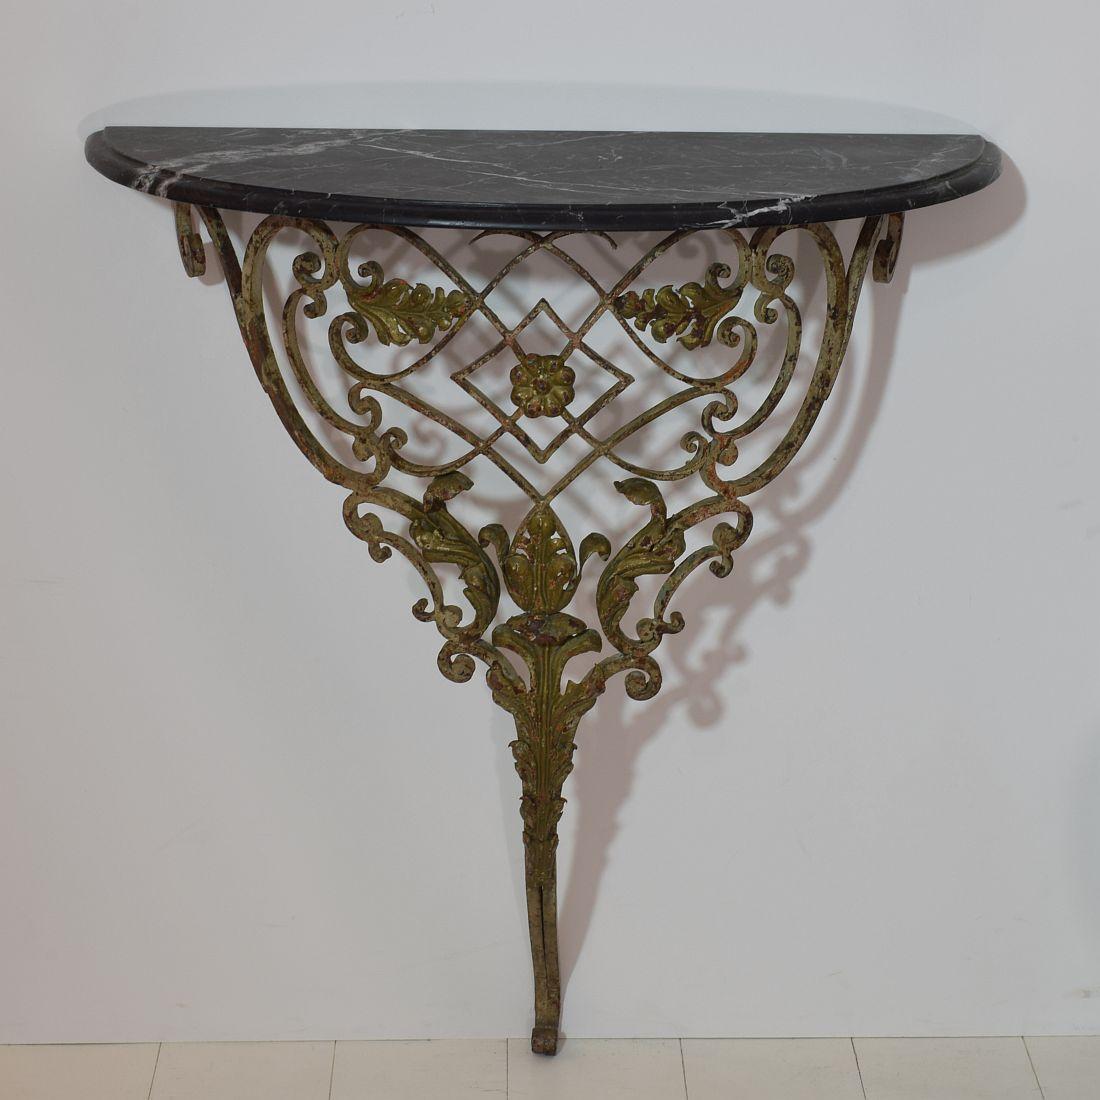 Beautiful hand forged iron marble-top console table.
A unique and original period piece with marble top of a later date
France, circa 1750-1800. Weathered and small losses.
  